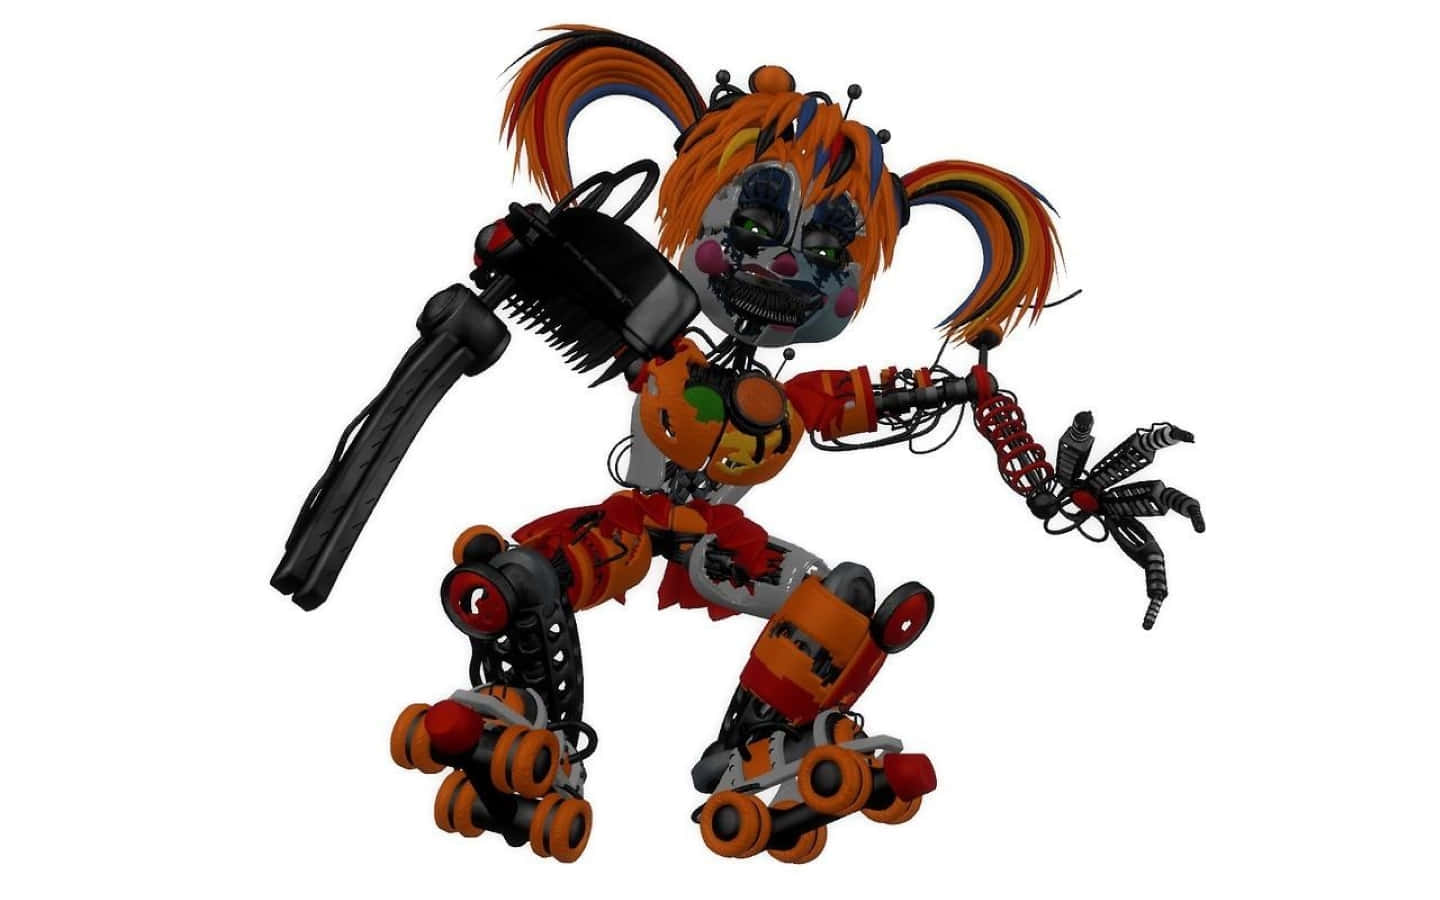 Scrap Baby from Five Nights at Freddy's in a Fierce Stance Wallpaper